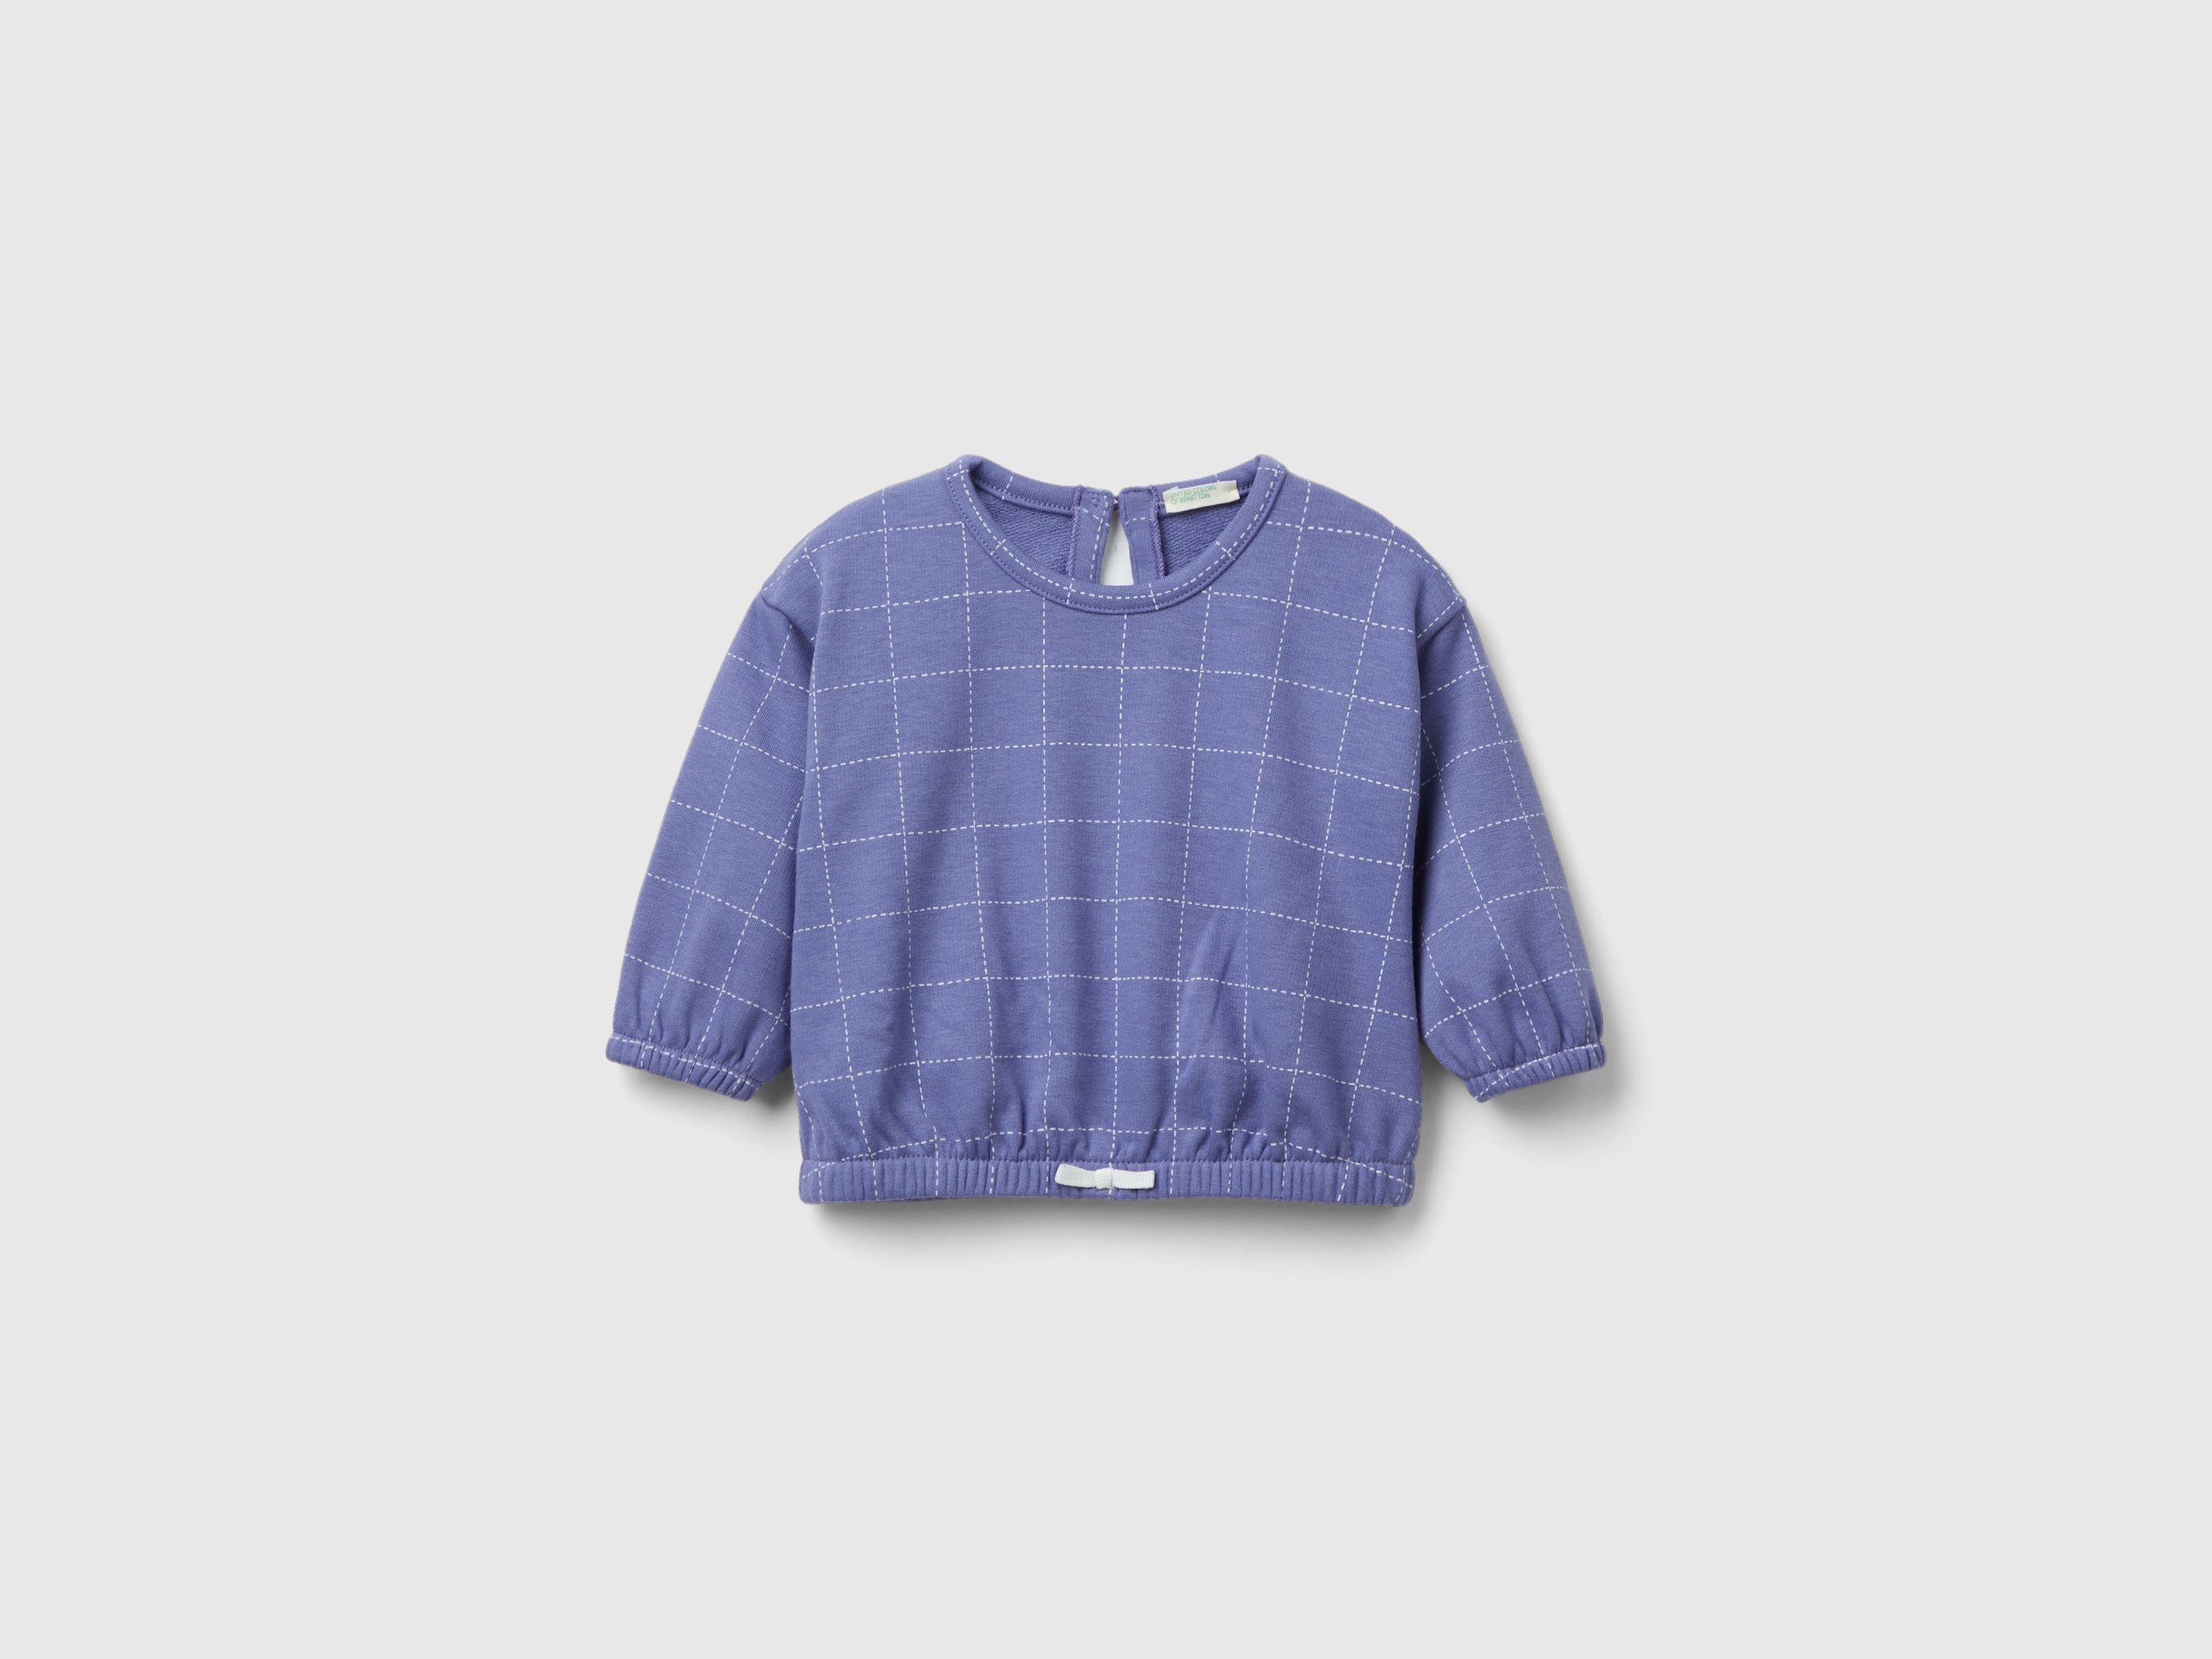 Benetton, Check Sweatshirt With Bow, size 0-1, Violet, Kids